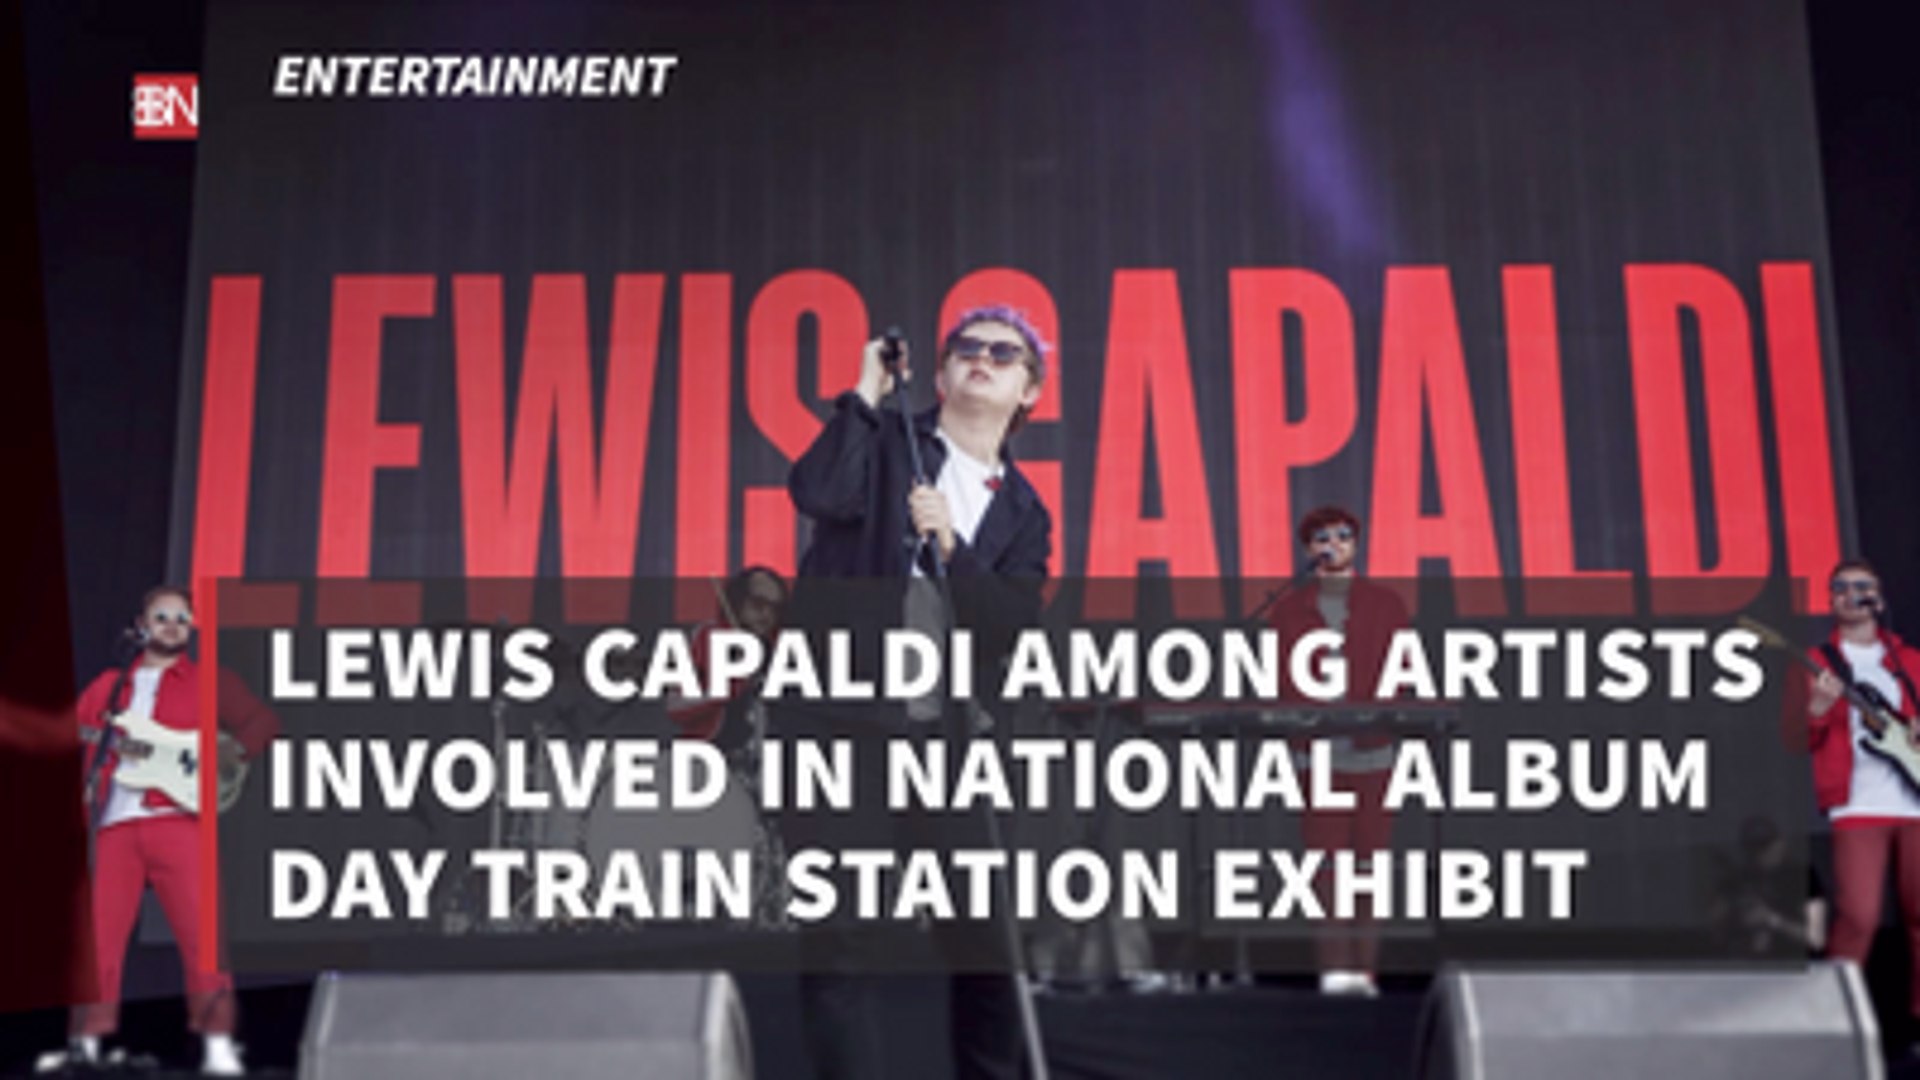 ⁣Lewis Capaldi And The National Album Day Train Station Exhibit